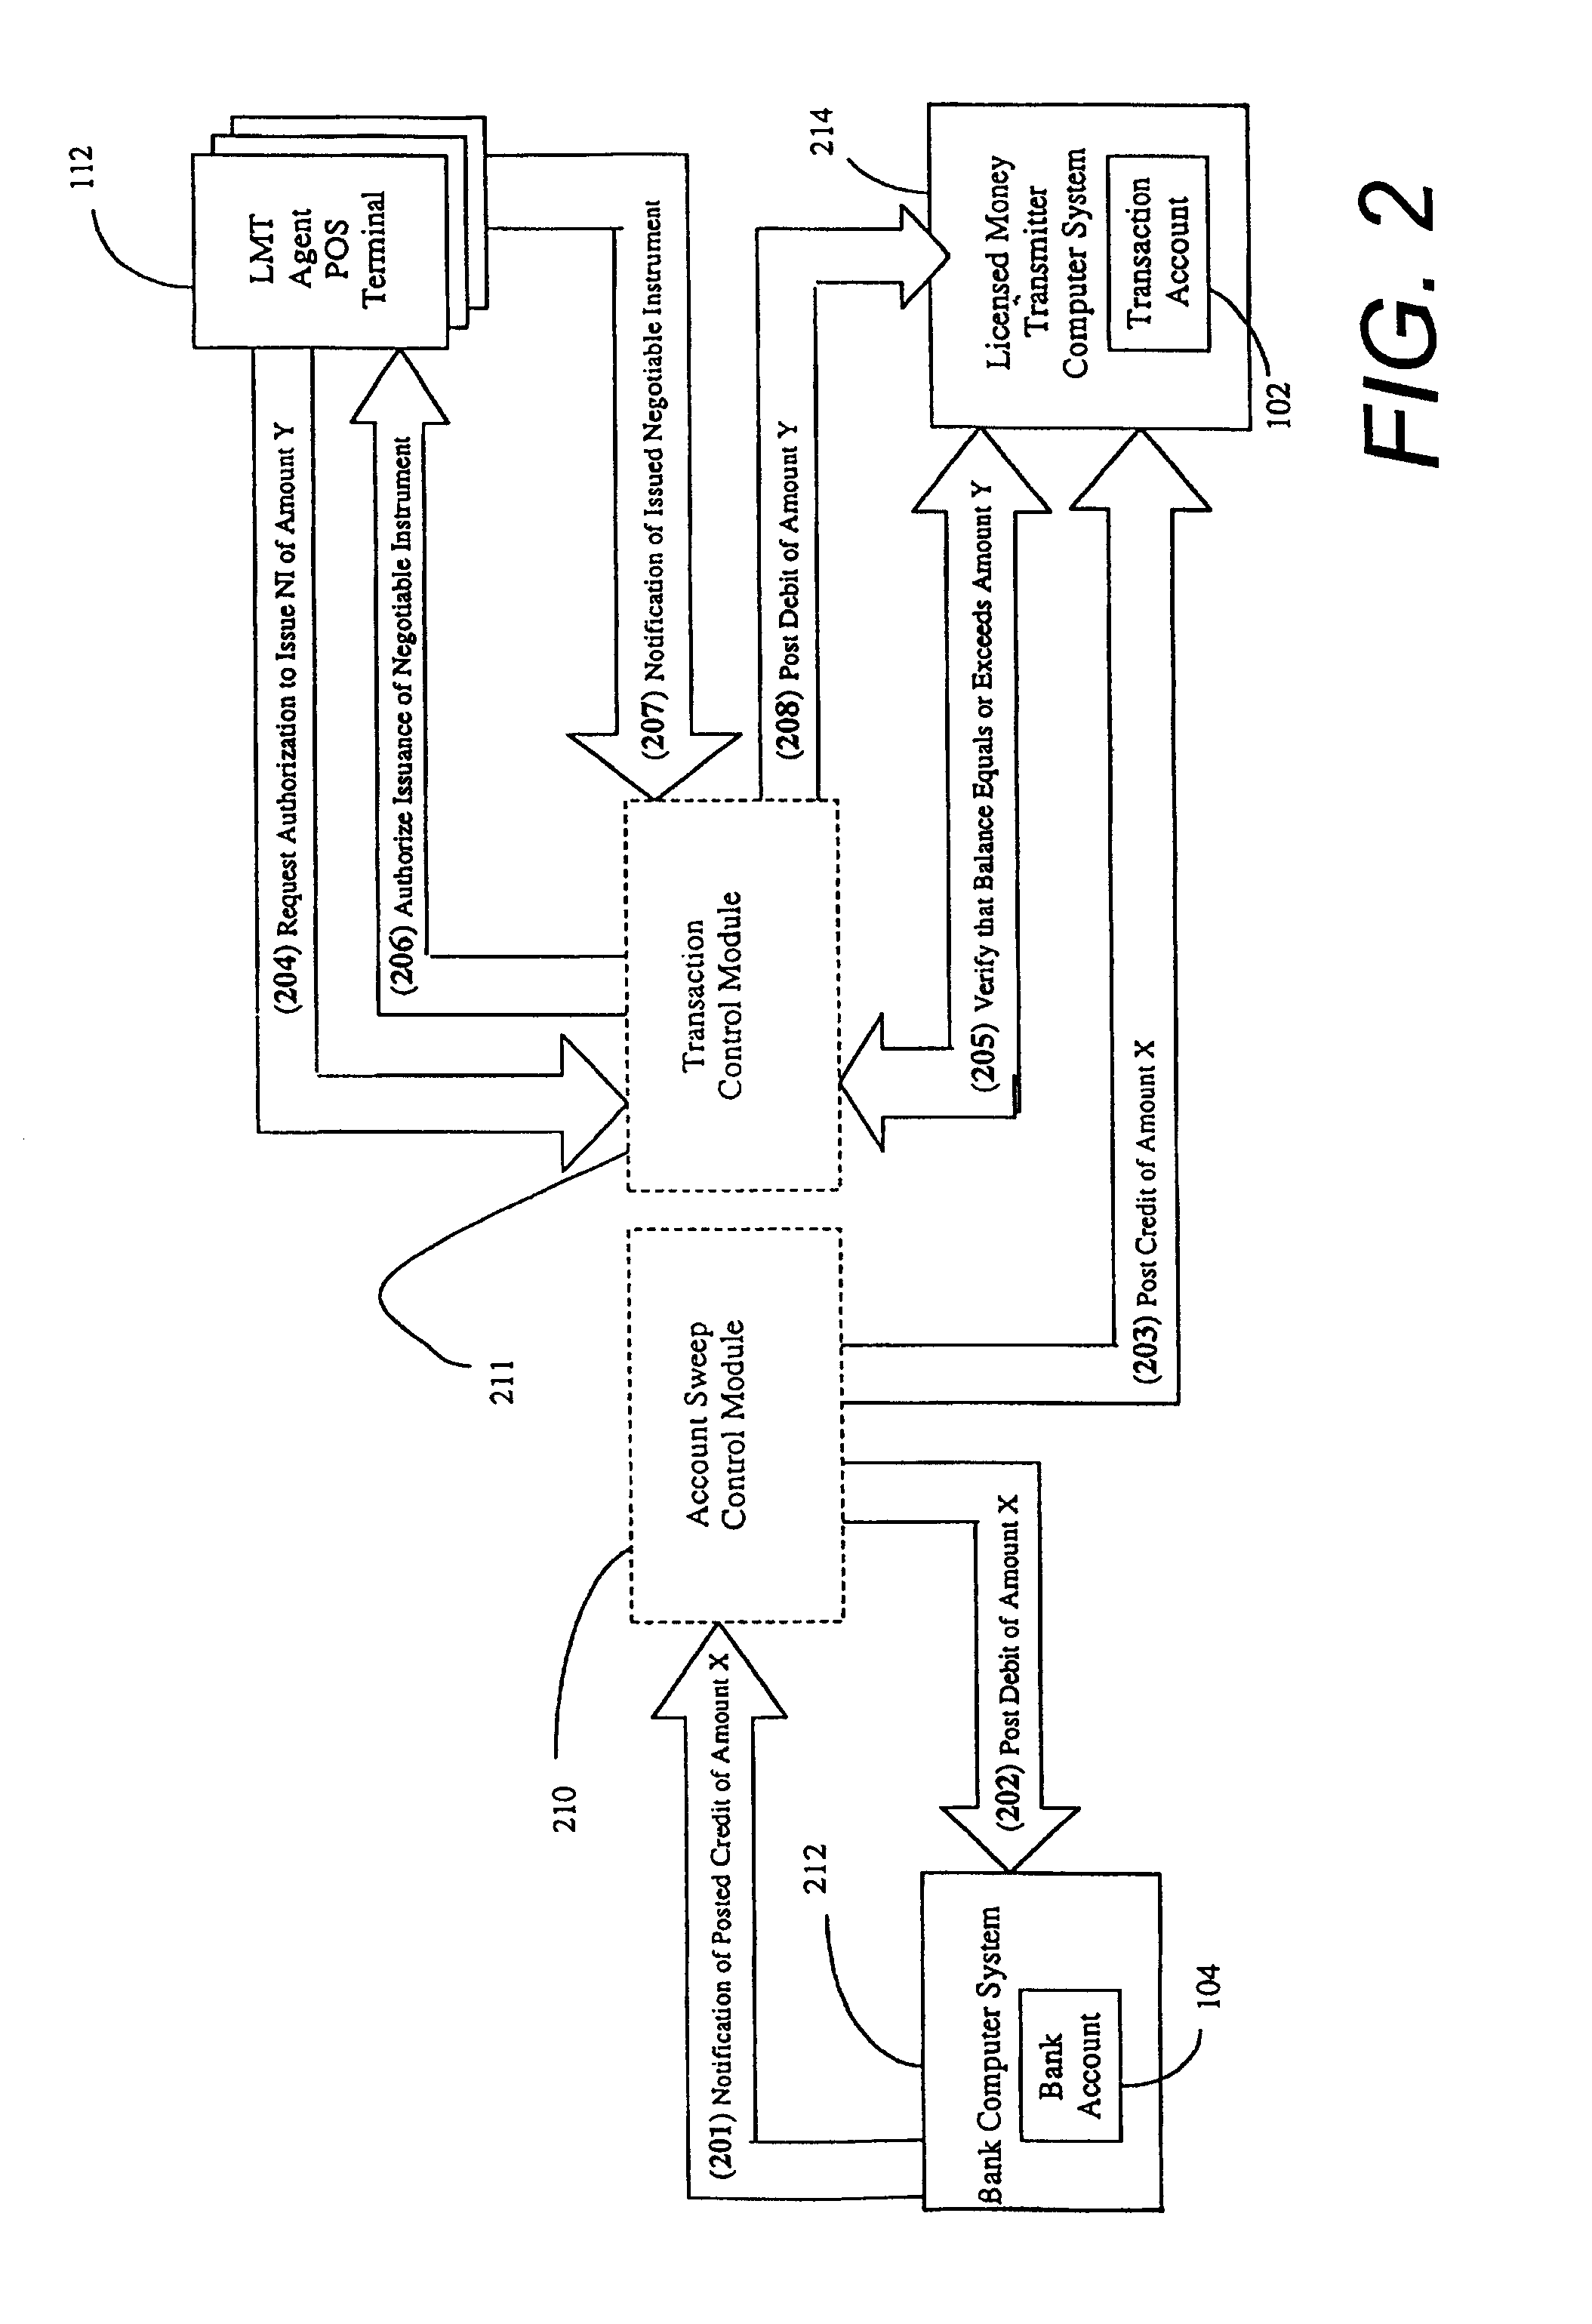 Card-based system and method for issuing negotiable instruments